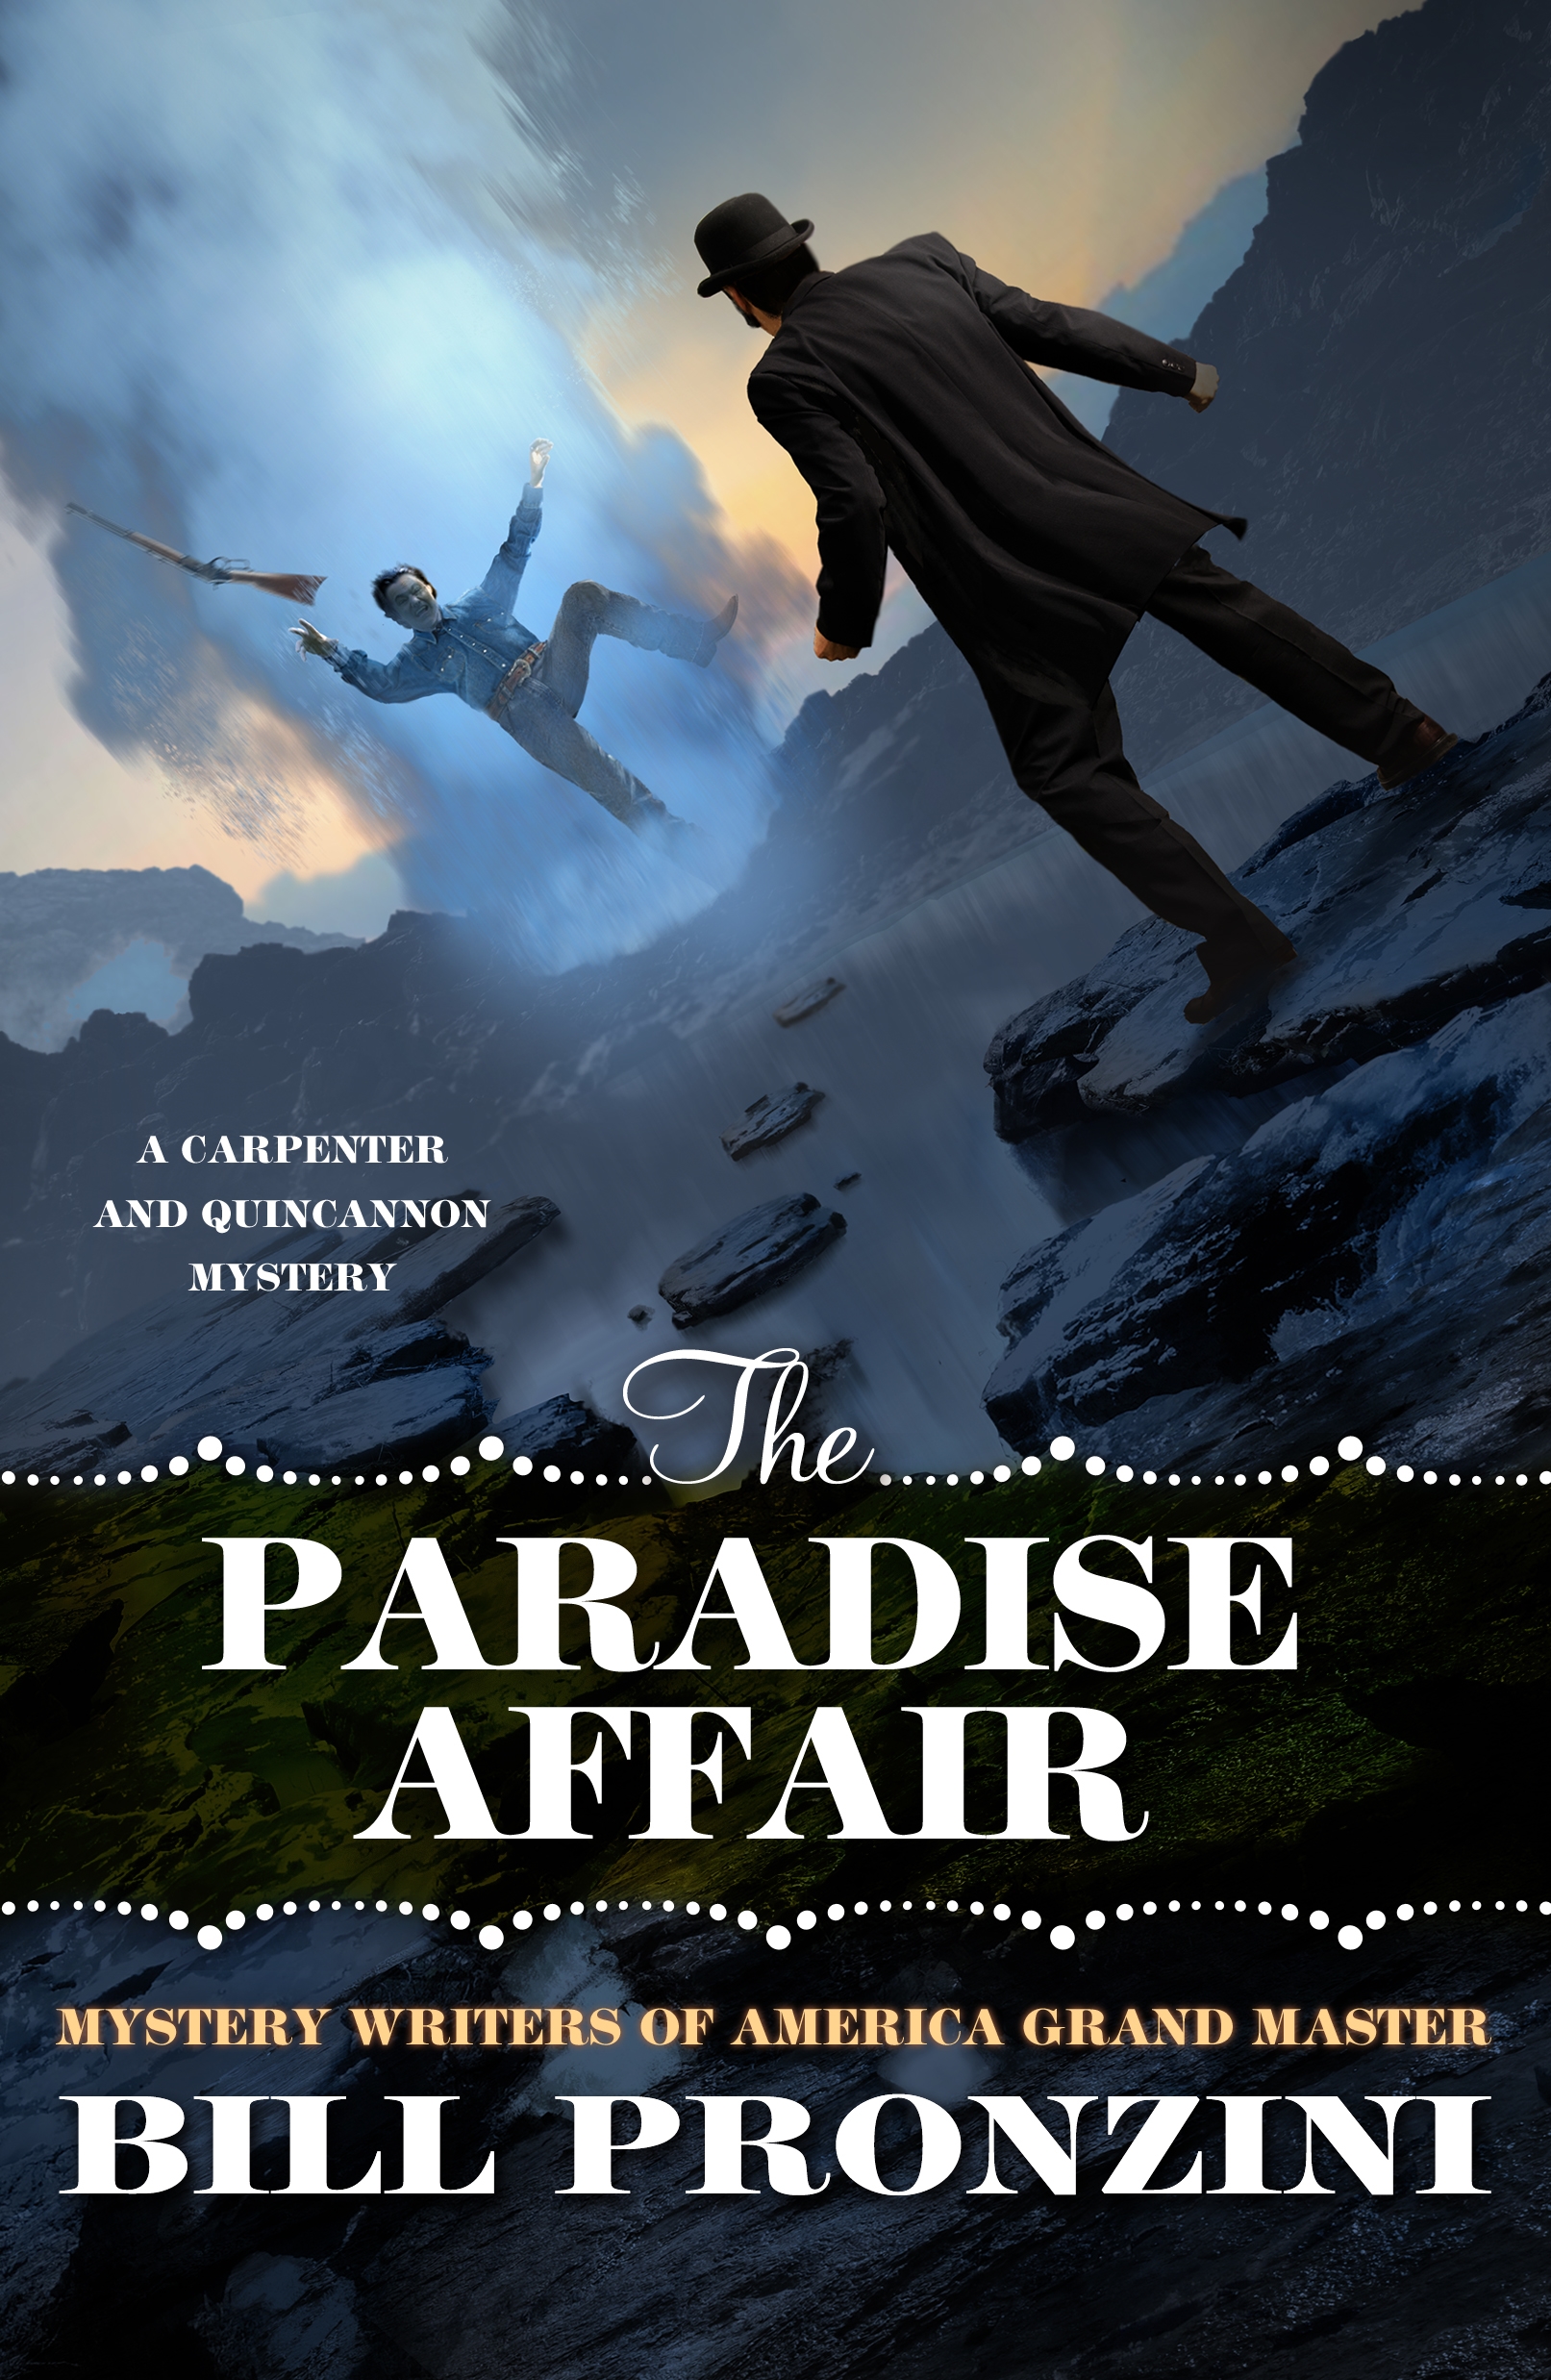 The Paradise Affair : A Carpenter and Quincannon Mystery by Bill Pronzini